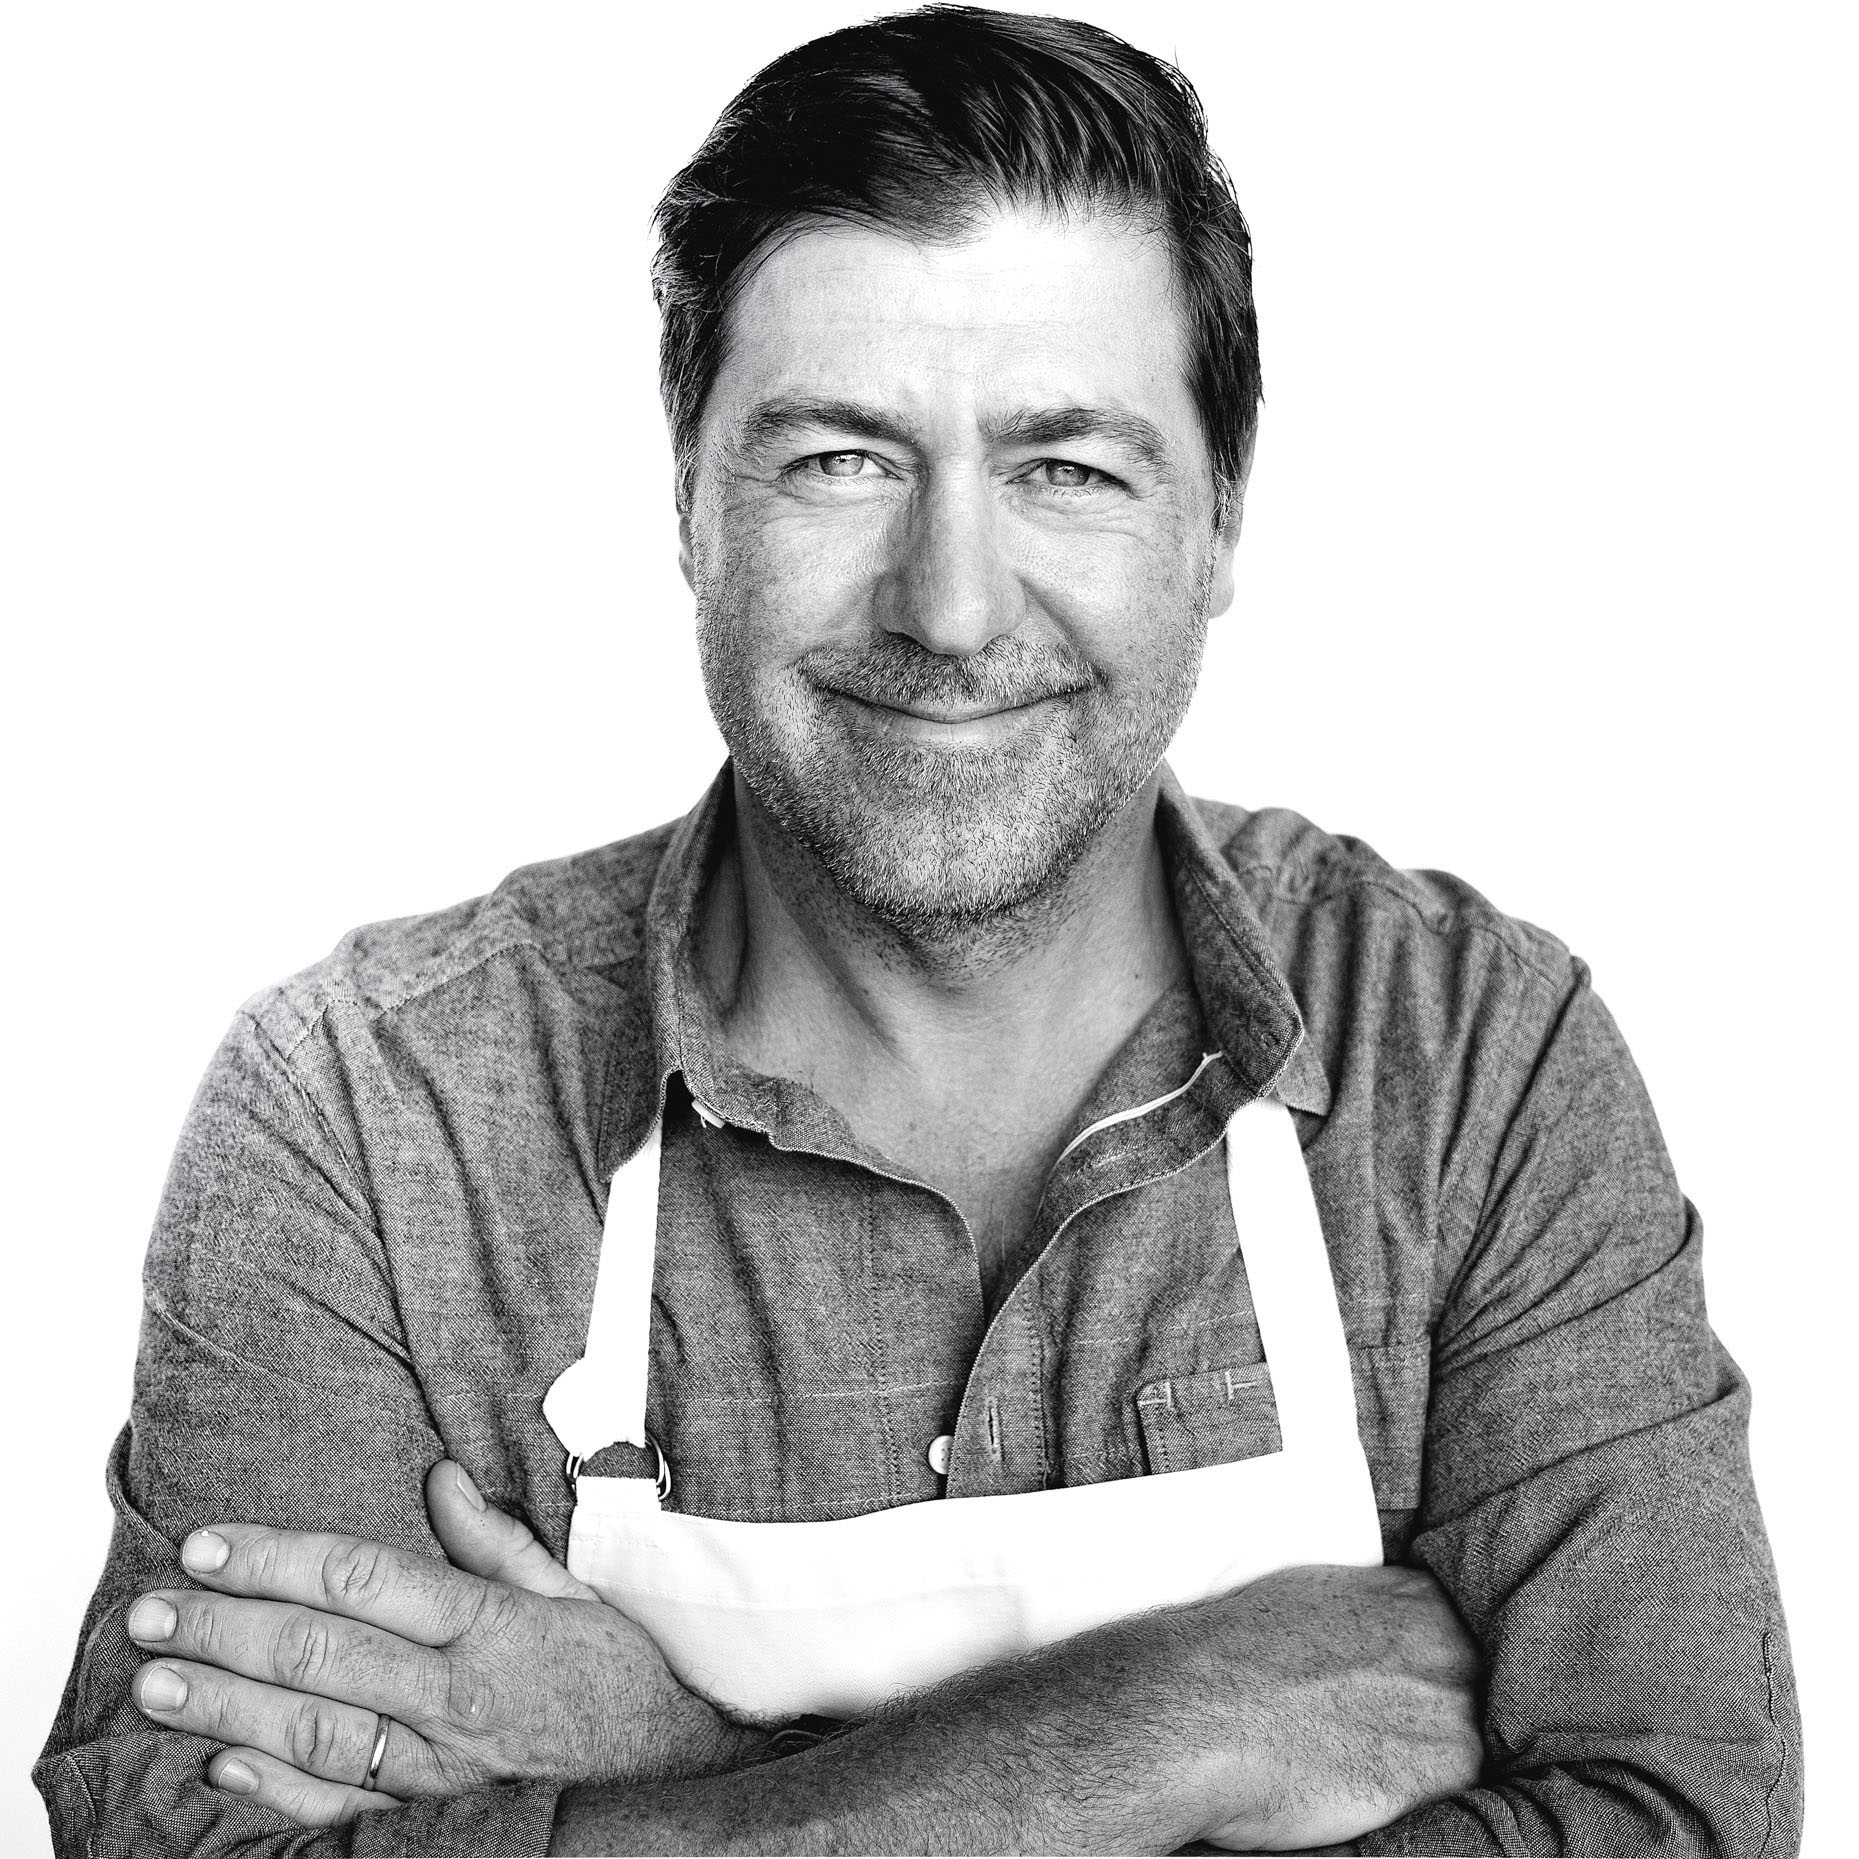 The Massachusetts native and his restaurants have earned numerous James Beard nominations and awards, including Best Chef: Southeast (FIG, Mike Lata, 2009), Best Chef: Southeast (FIG, Jason Stanhope, 2015) Outstanding Wine Program (FIG, 2018), and as a semifinalist for Outstanding Chef (The Ordinary, Lata, 2018).